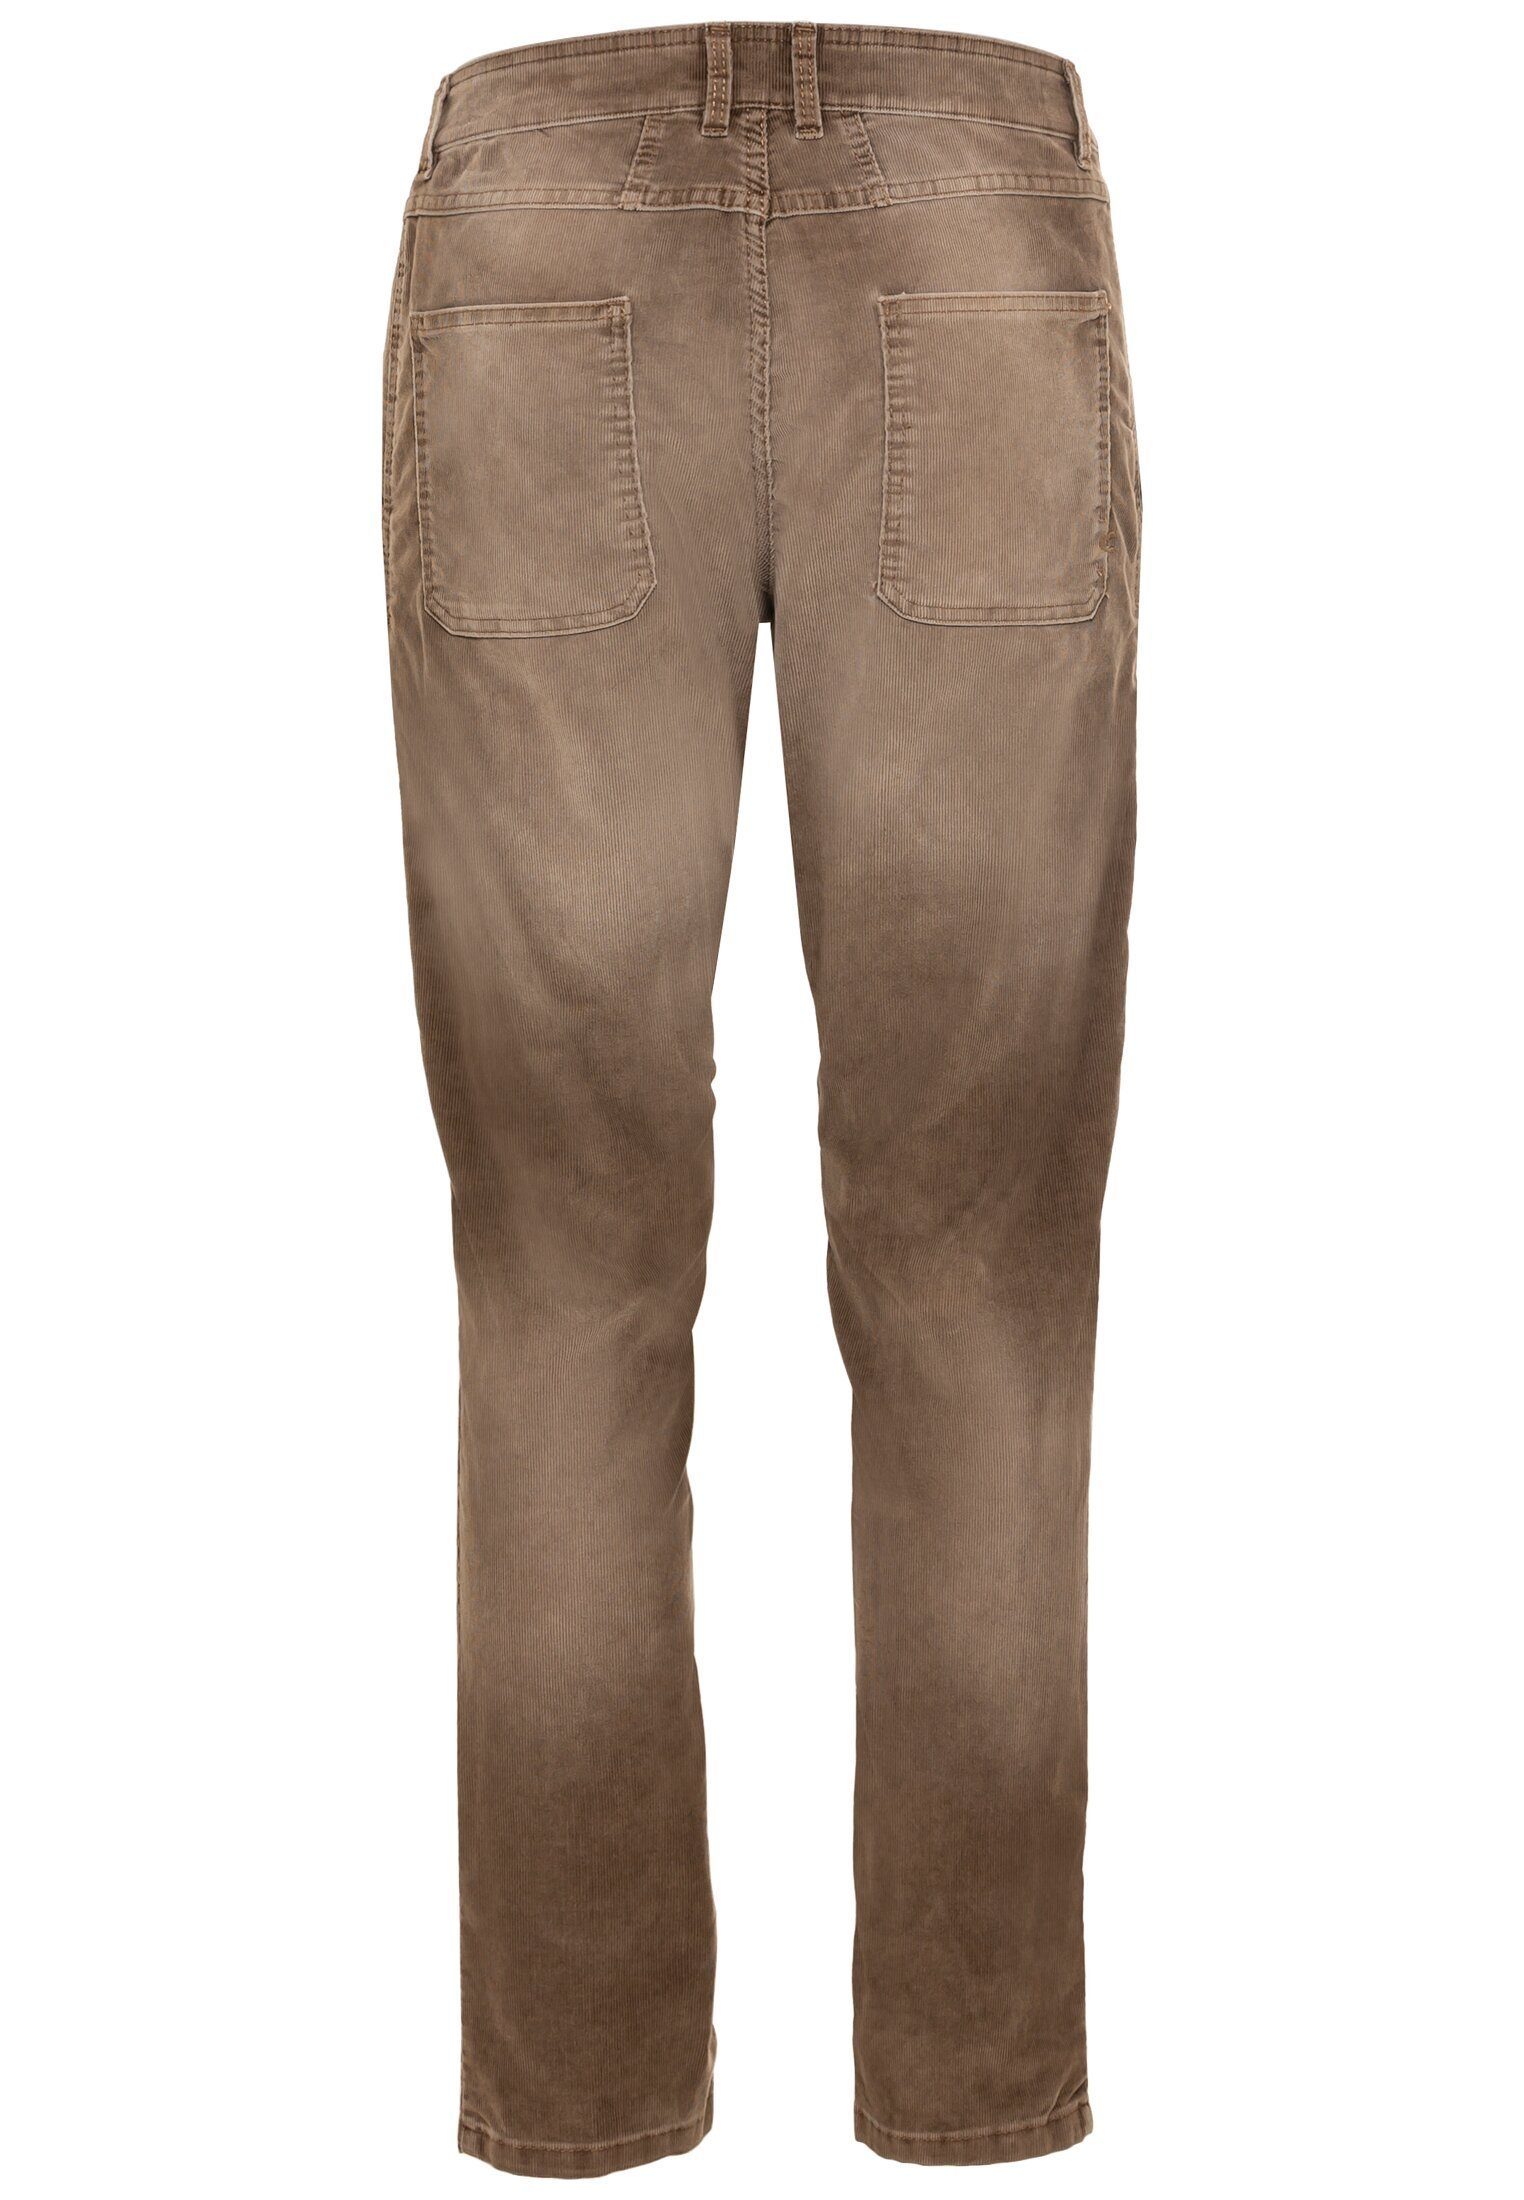 Fit camel Herren Chinohose active active Chino camel Tapered